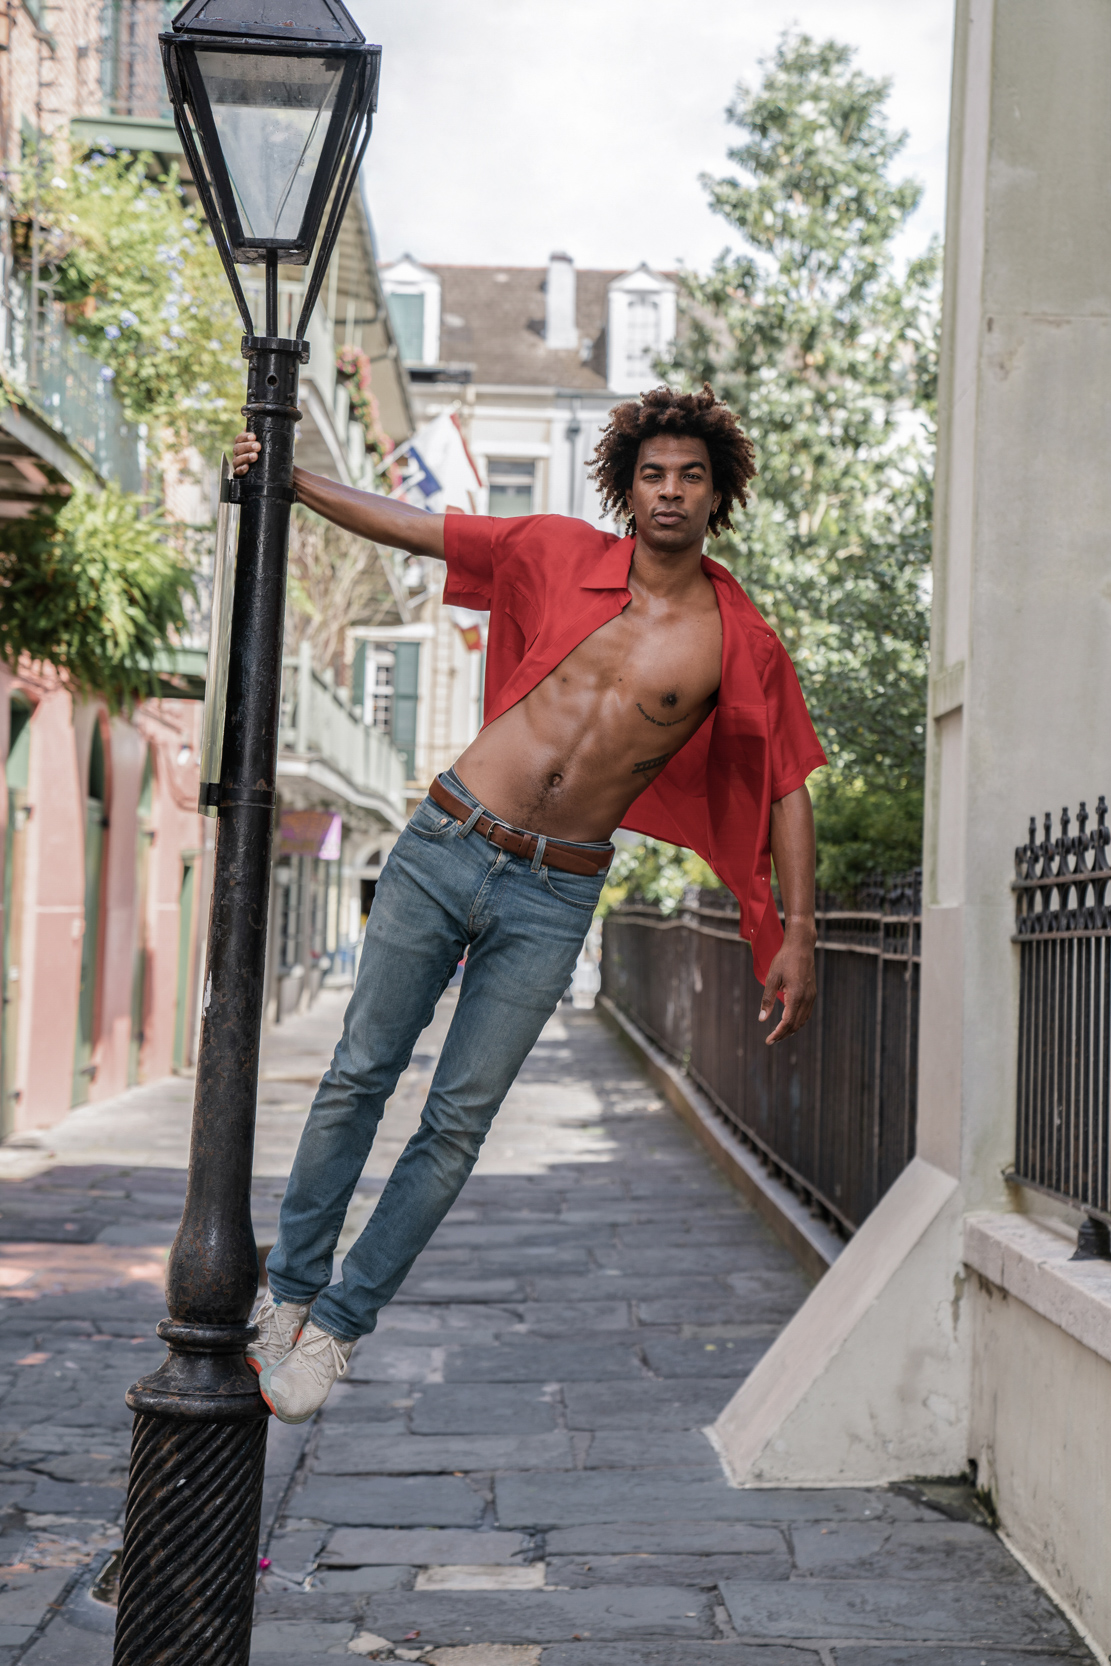 A shirtless dancer modeling and hanging from street post in the New Orleans French Quarter